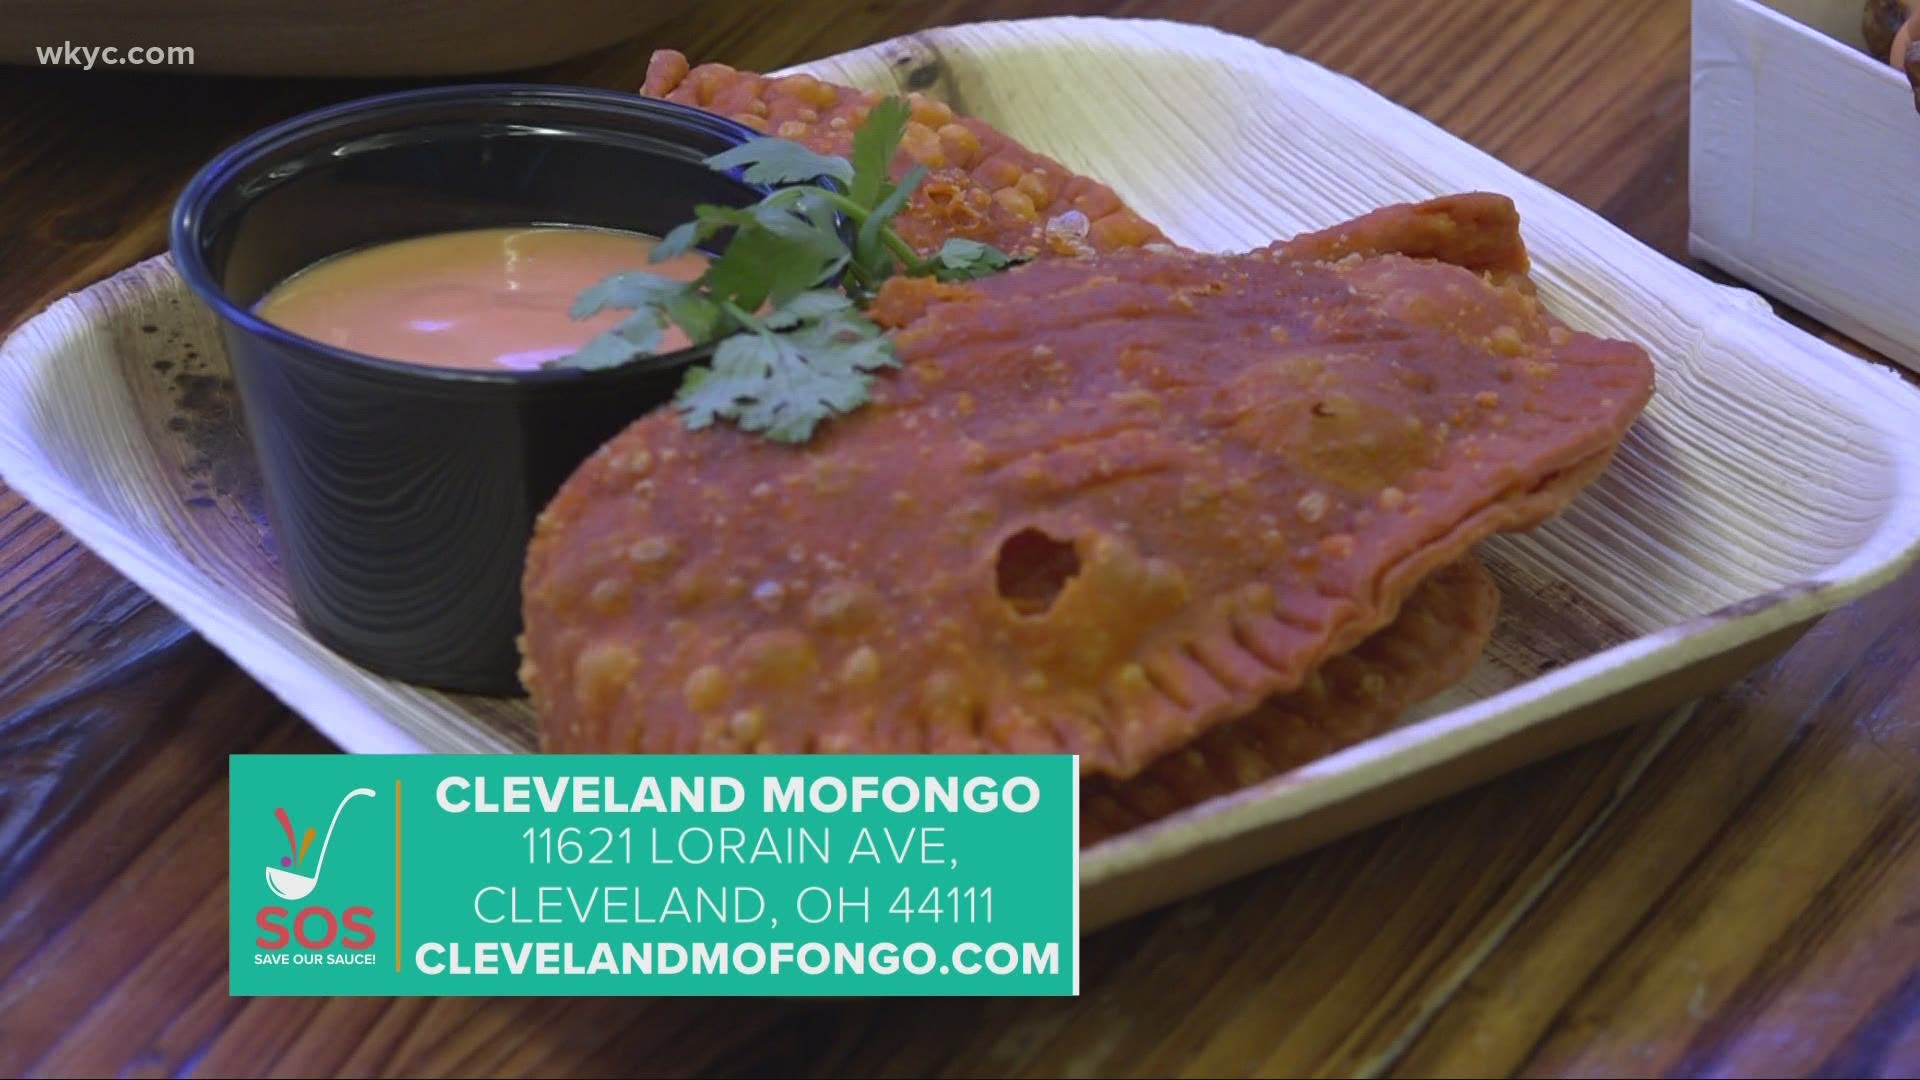 We're highlighting the Cleveland Mofongo restaurant as we continue the 'Save our Sauce' campaign in support of Northeast Ohio restaurants amid the COVID-19 pandemic.